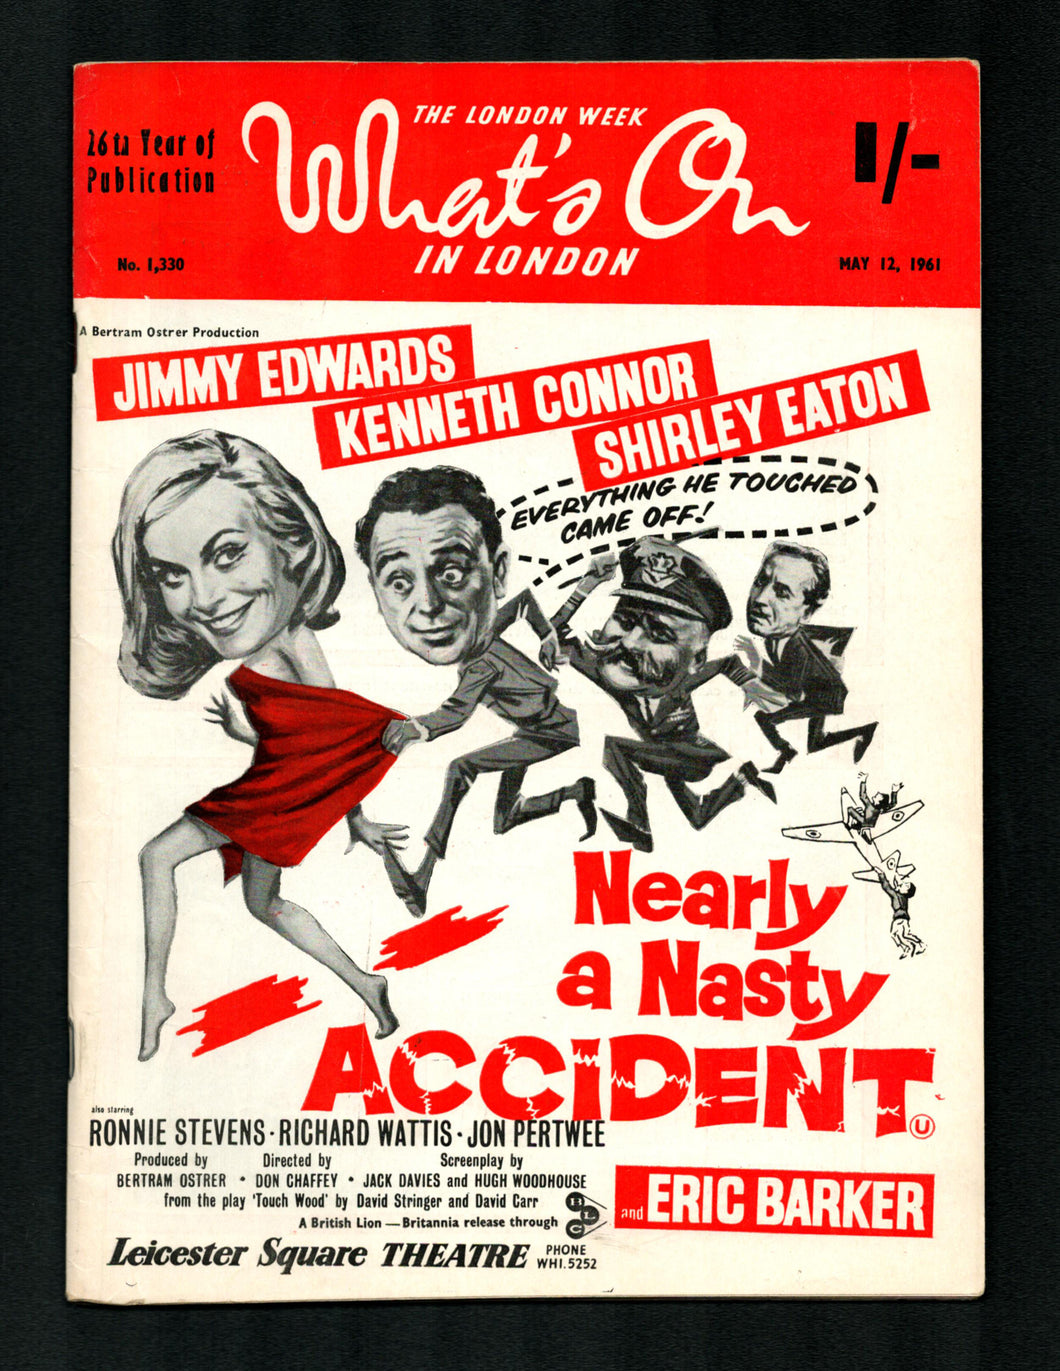 Whats on in London No 1329 May 12 1961